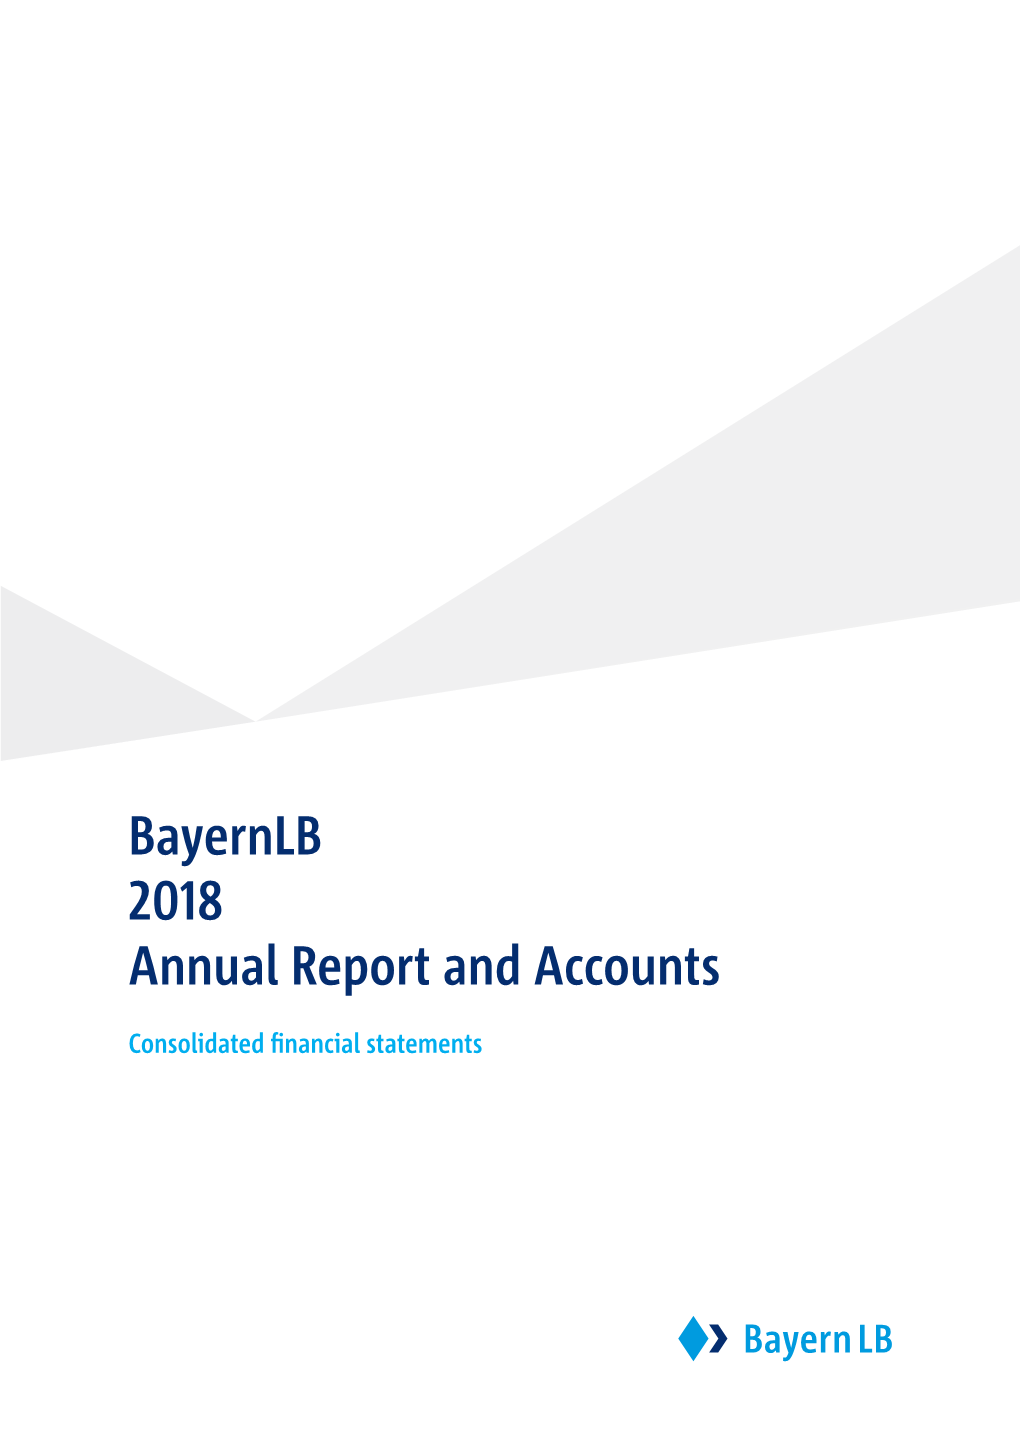 Bayernlb 2018 Annual Report and Accounts